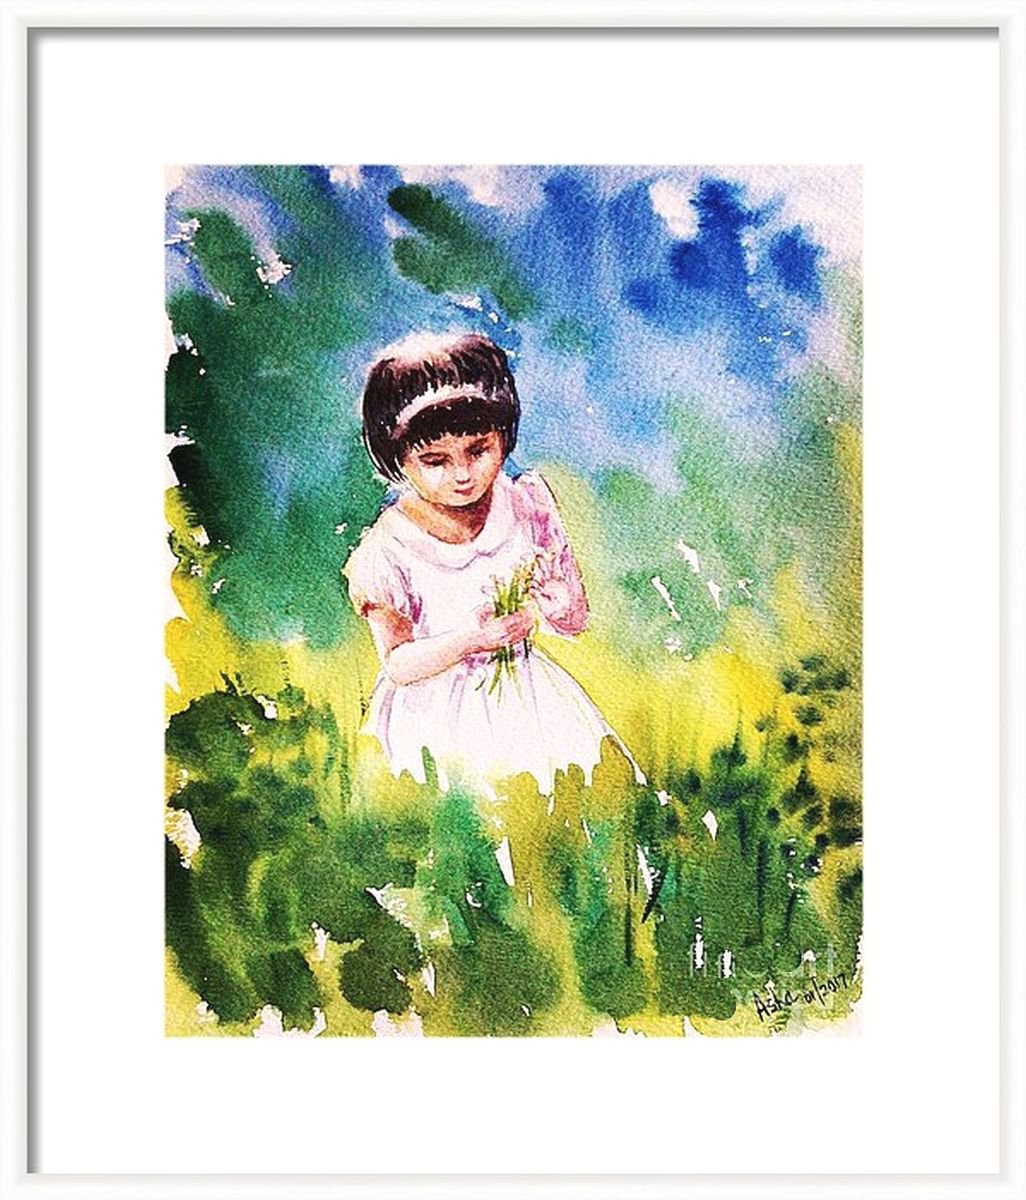 Little Girl in the garden painting - Happy childhood 3 (9 x 12-?) by Asha Shenoy